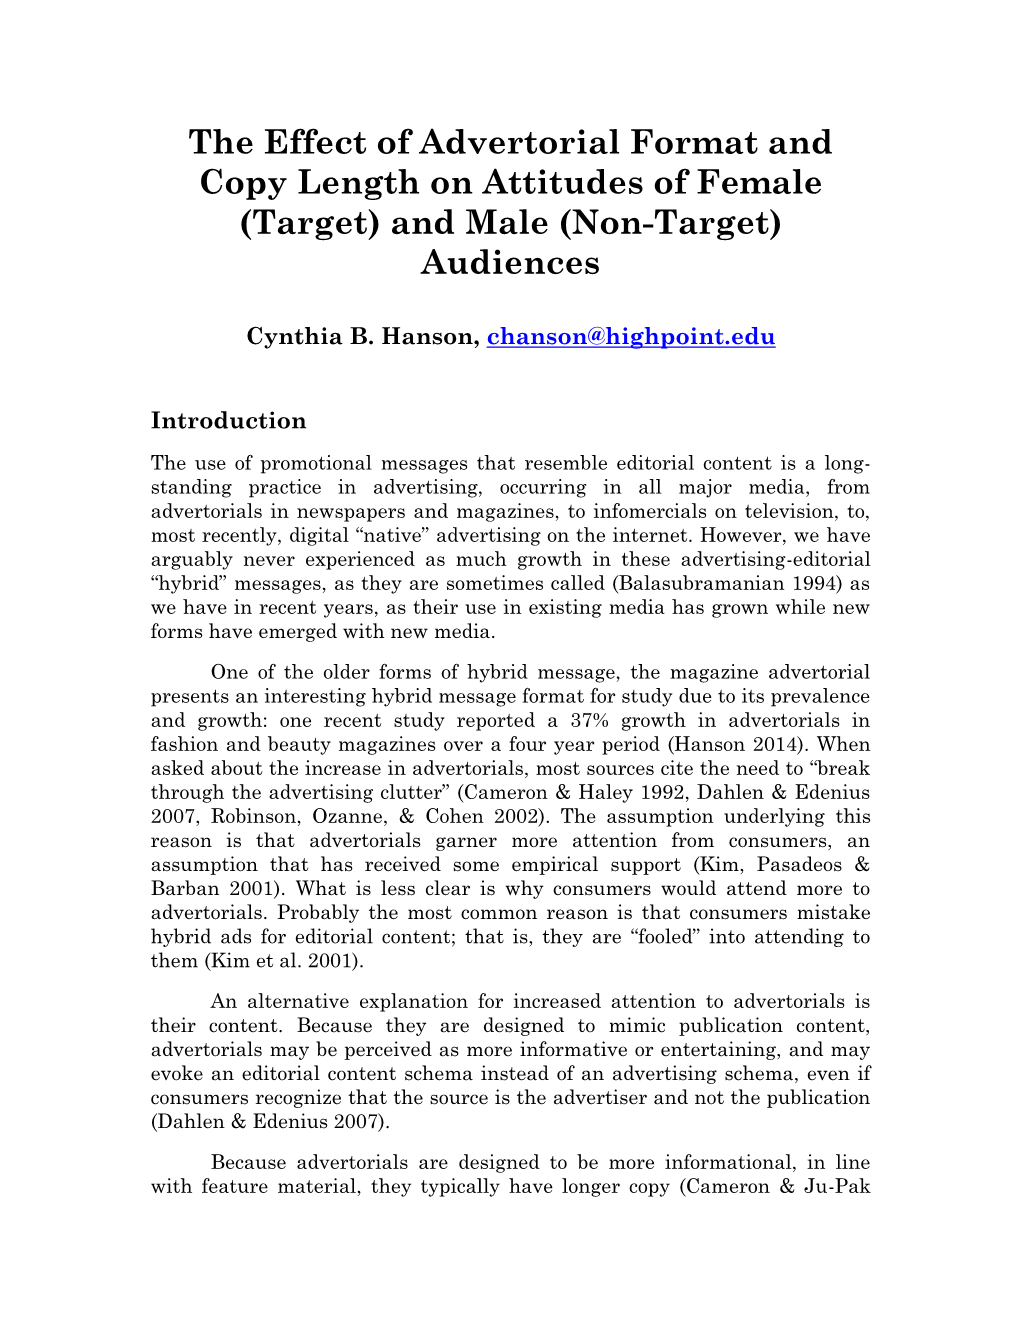 The Effect of Advertorial Format and Copy Length on Attitudes of Female (Target) and Male (Non-Target) Audiences